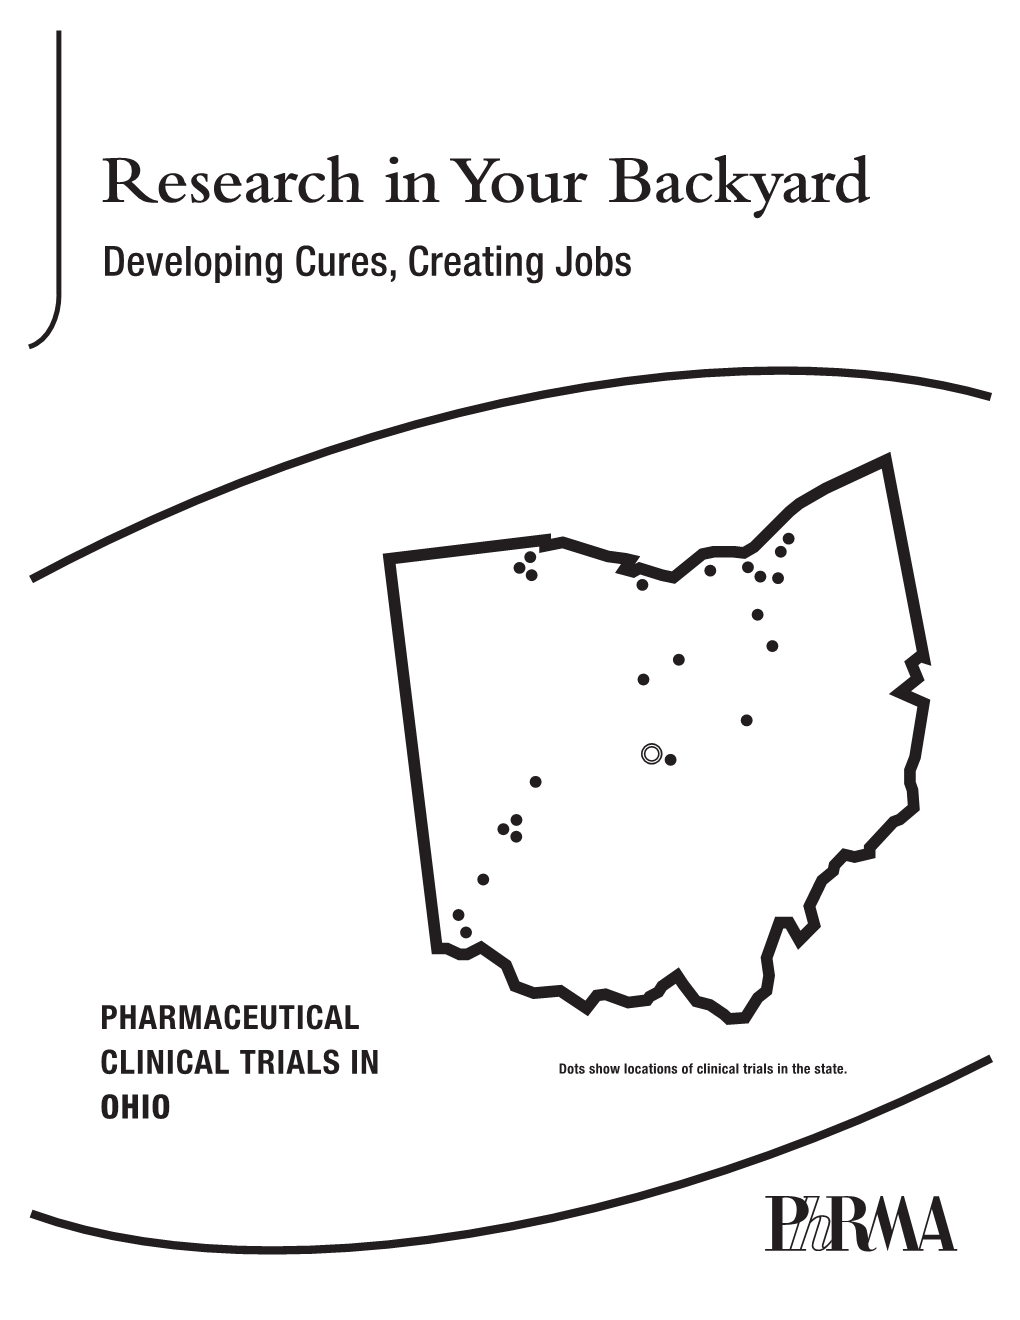 Clinical Trials in Ohio